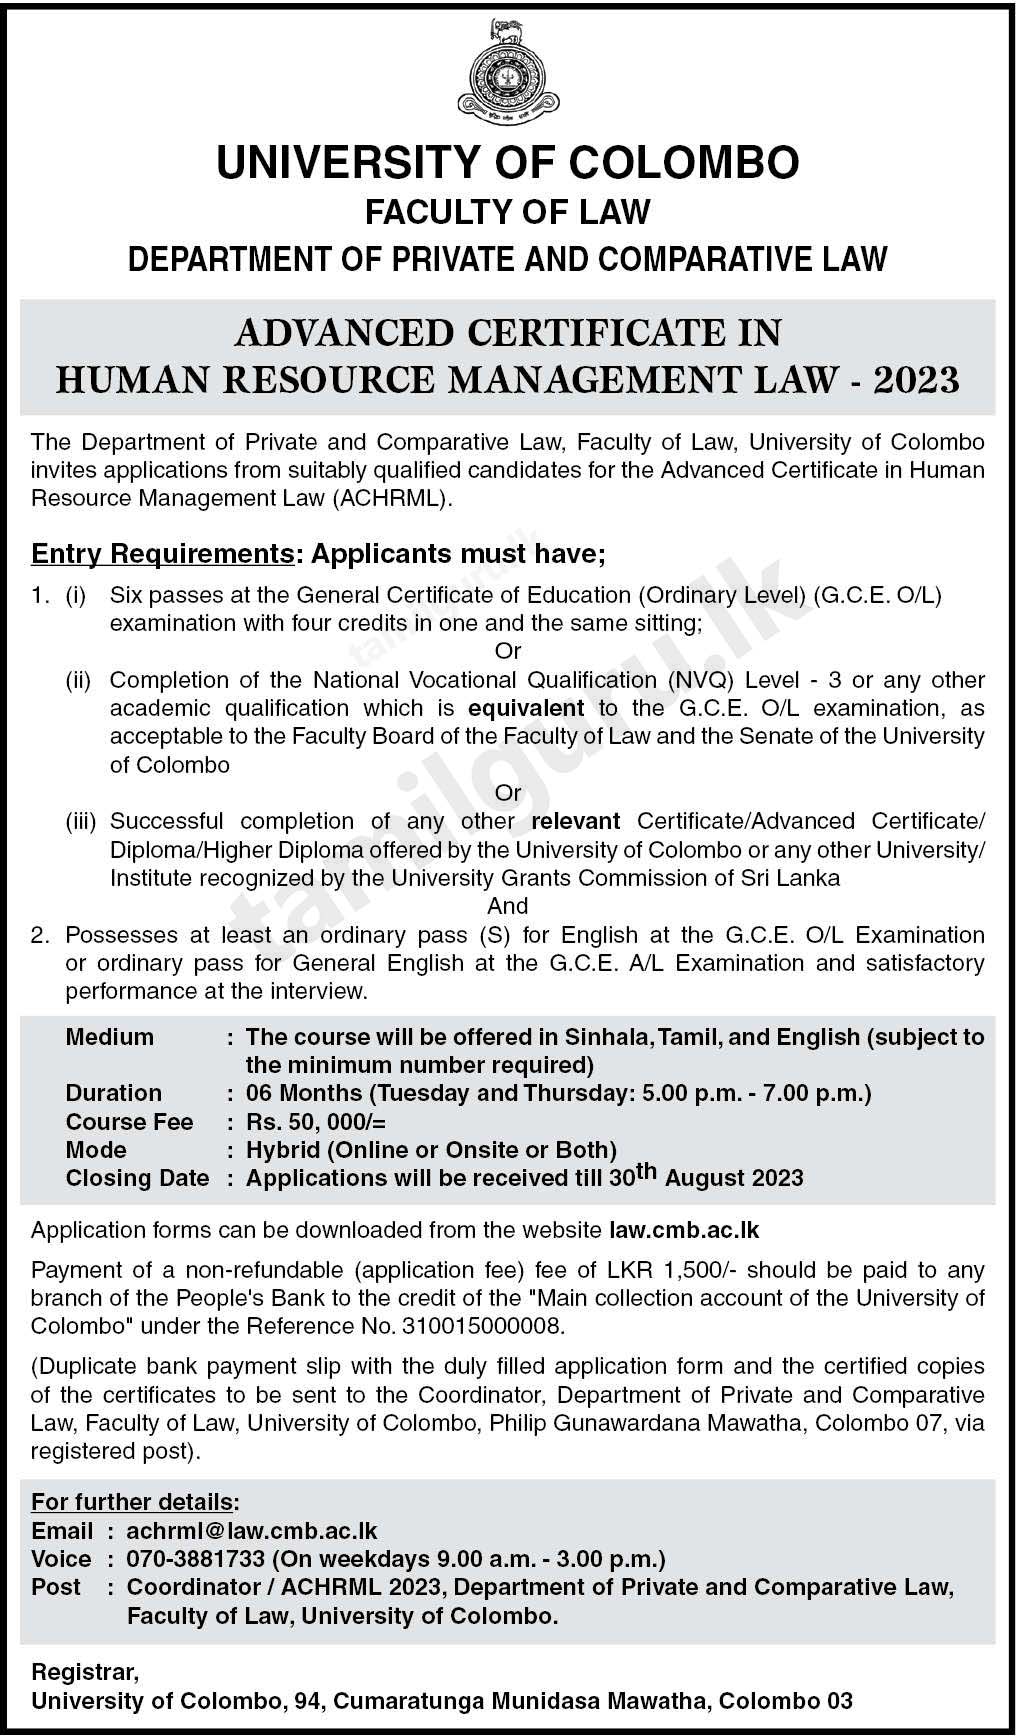 Advanced Certificate in Human Resource Management Law (ACHRML) 2023 - University of Colombo